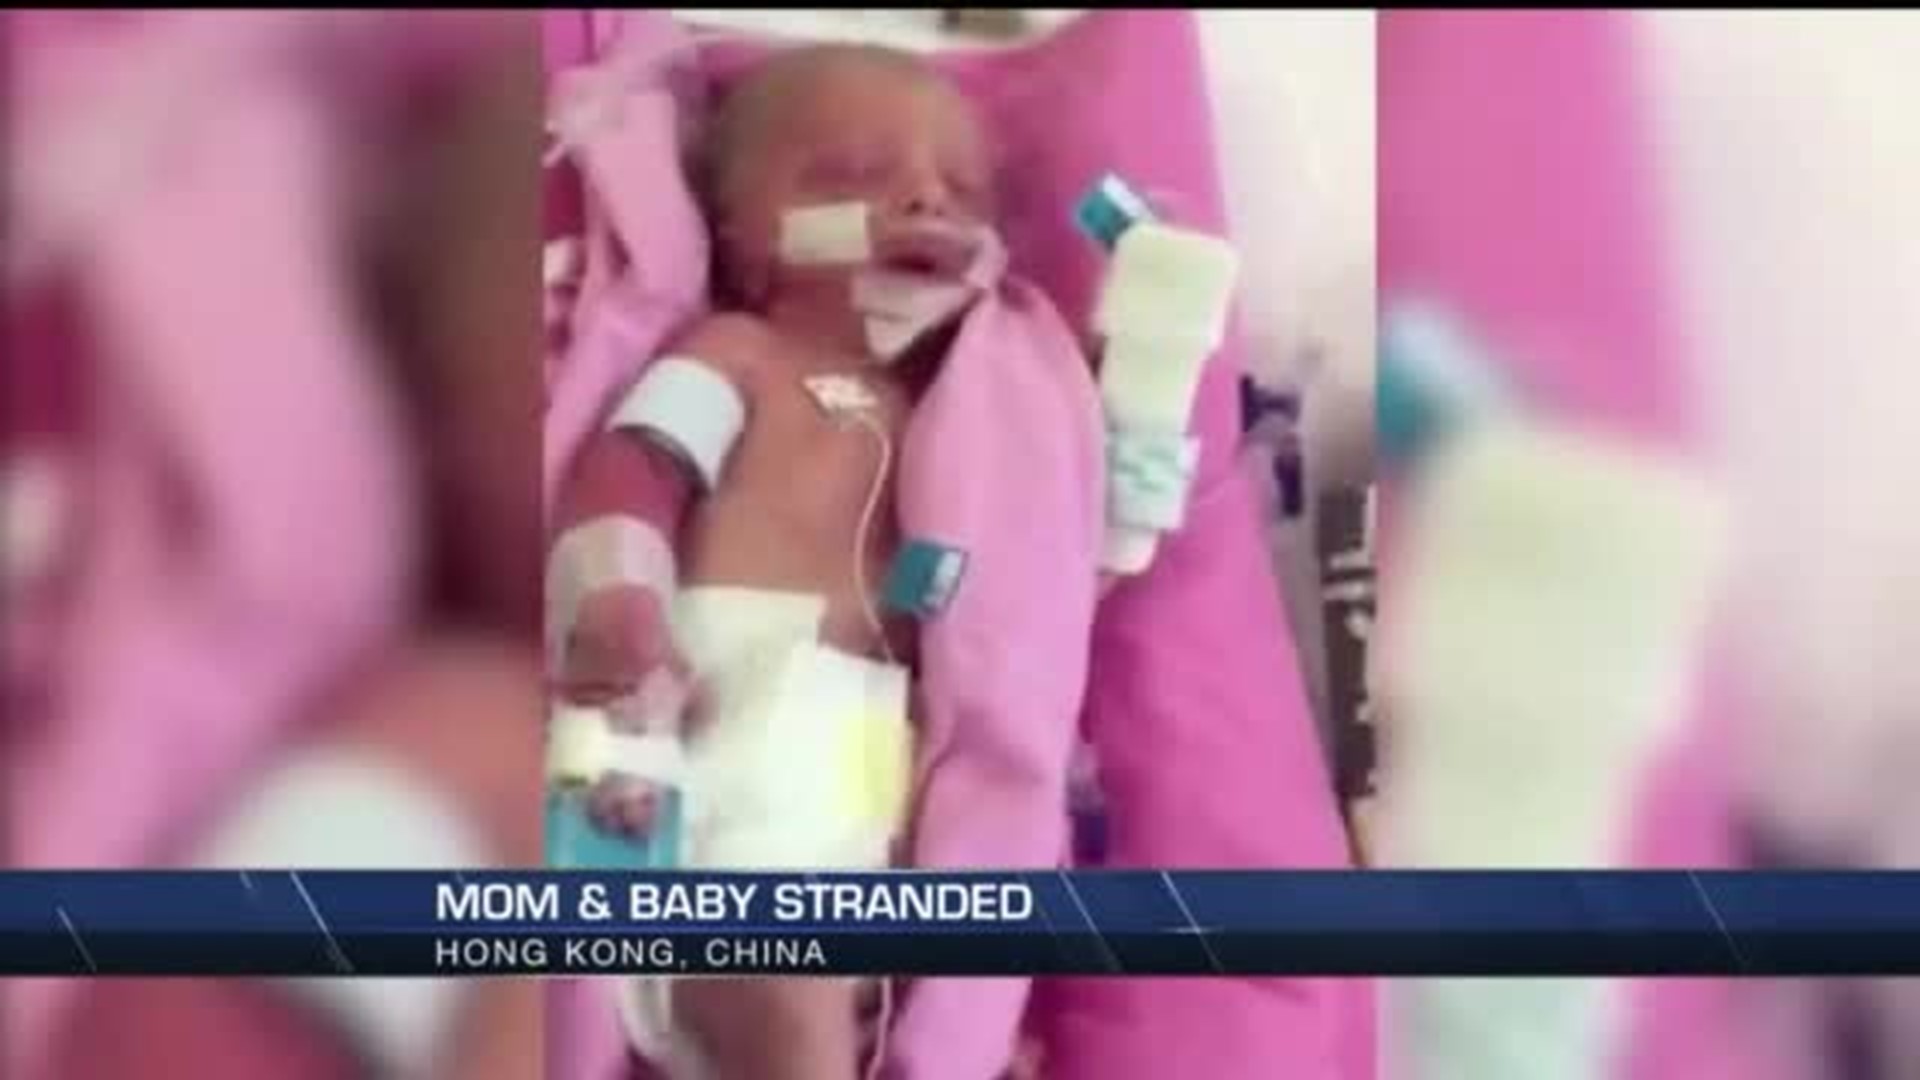 Iowa mom stranded abroad after giving birth